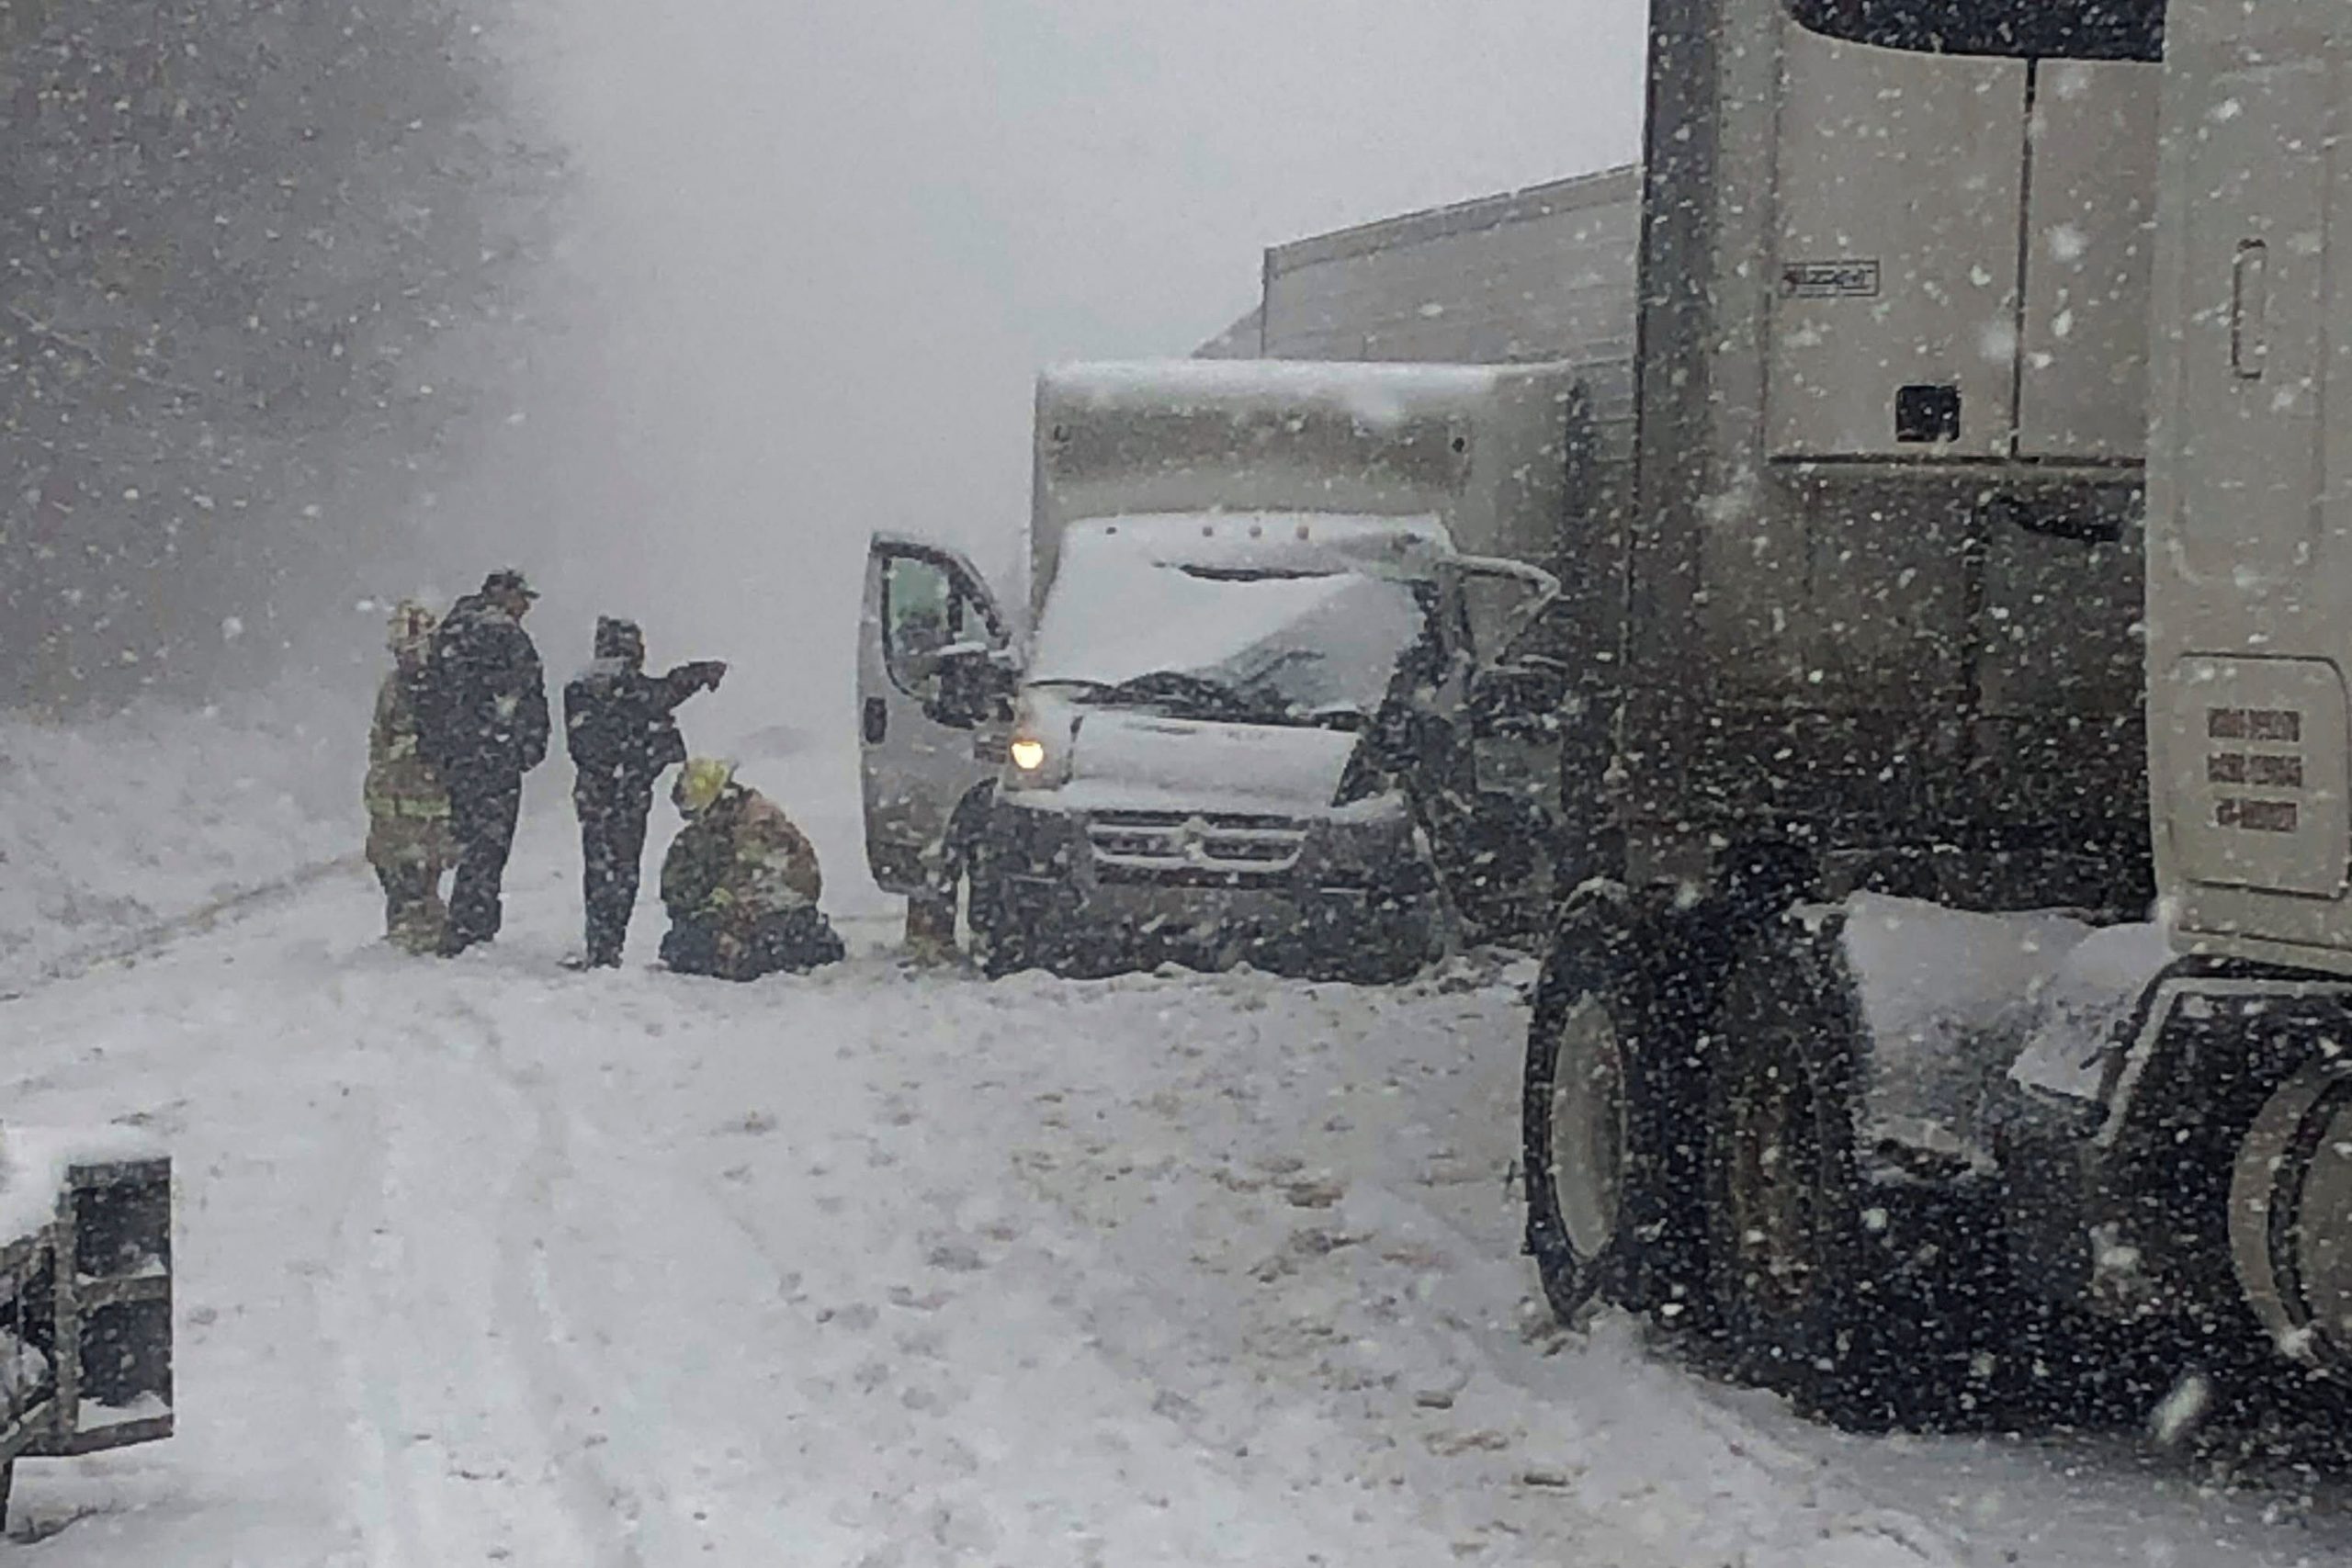 Snow, ice blast through Southeast US with powerful winter storm